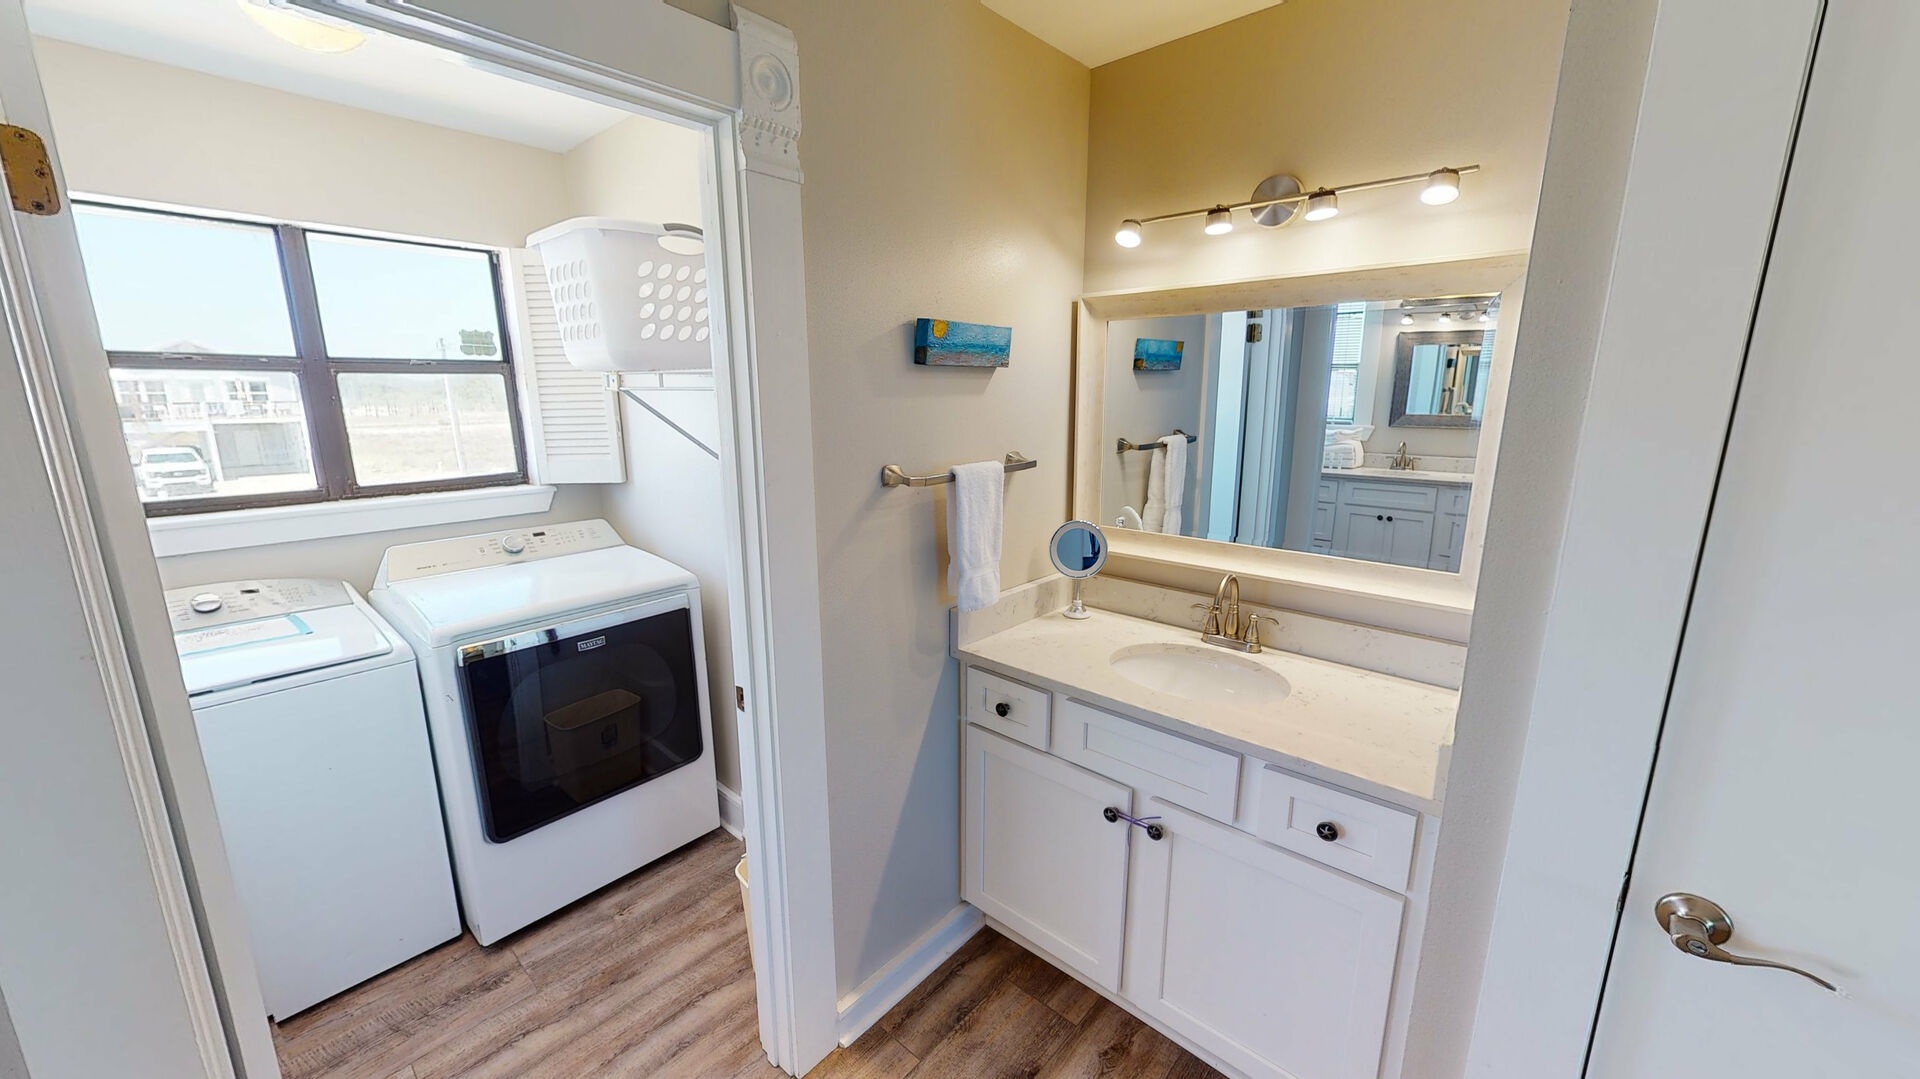 Off Master bedroom is a private bath and laundry room